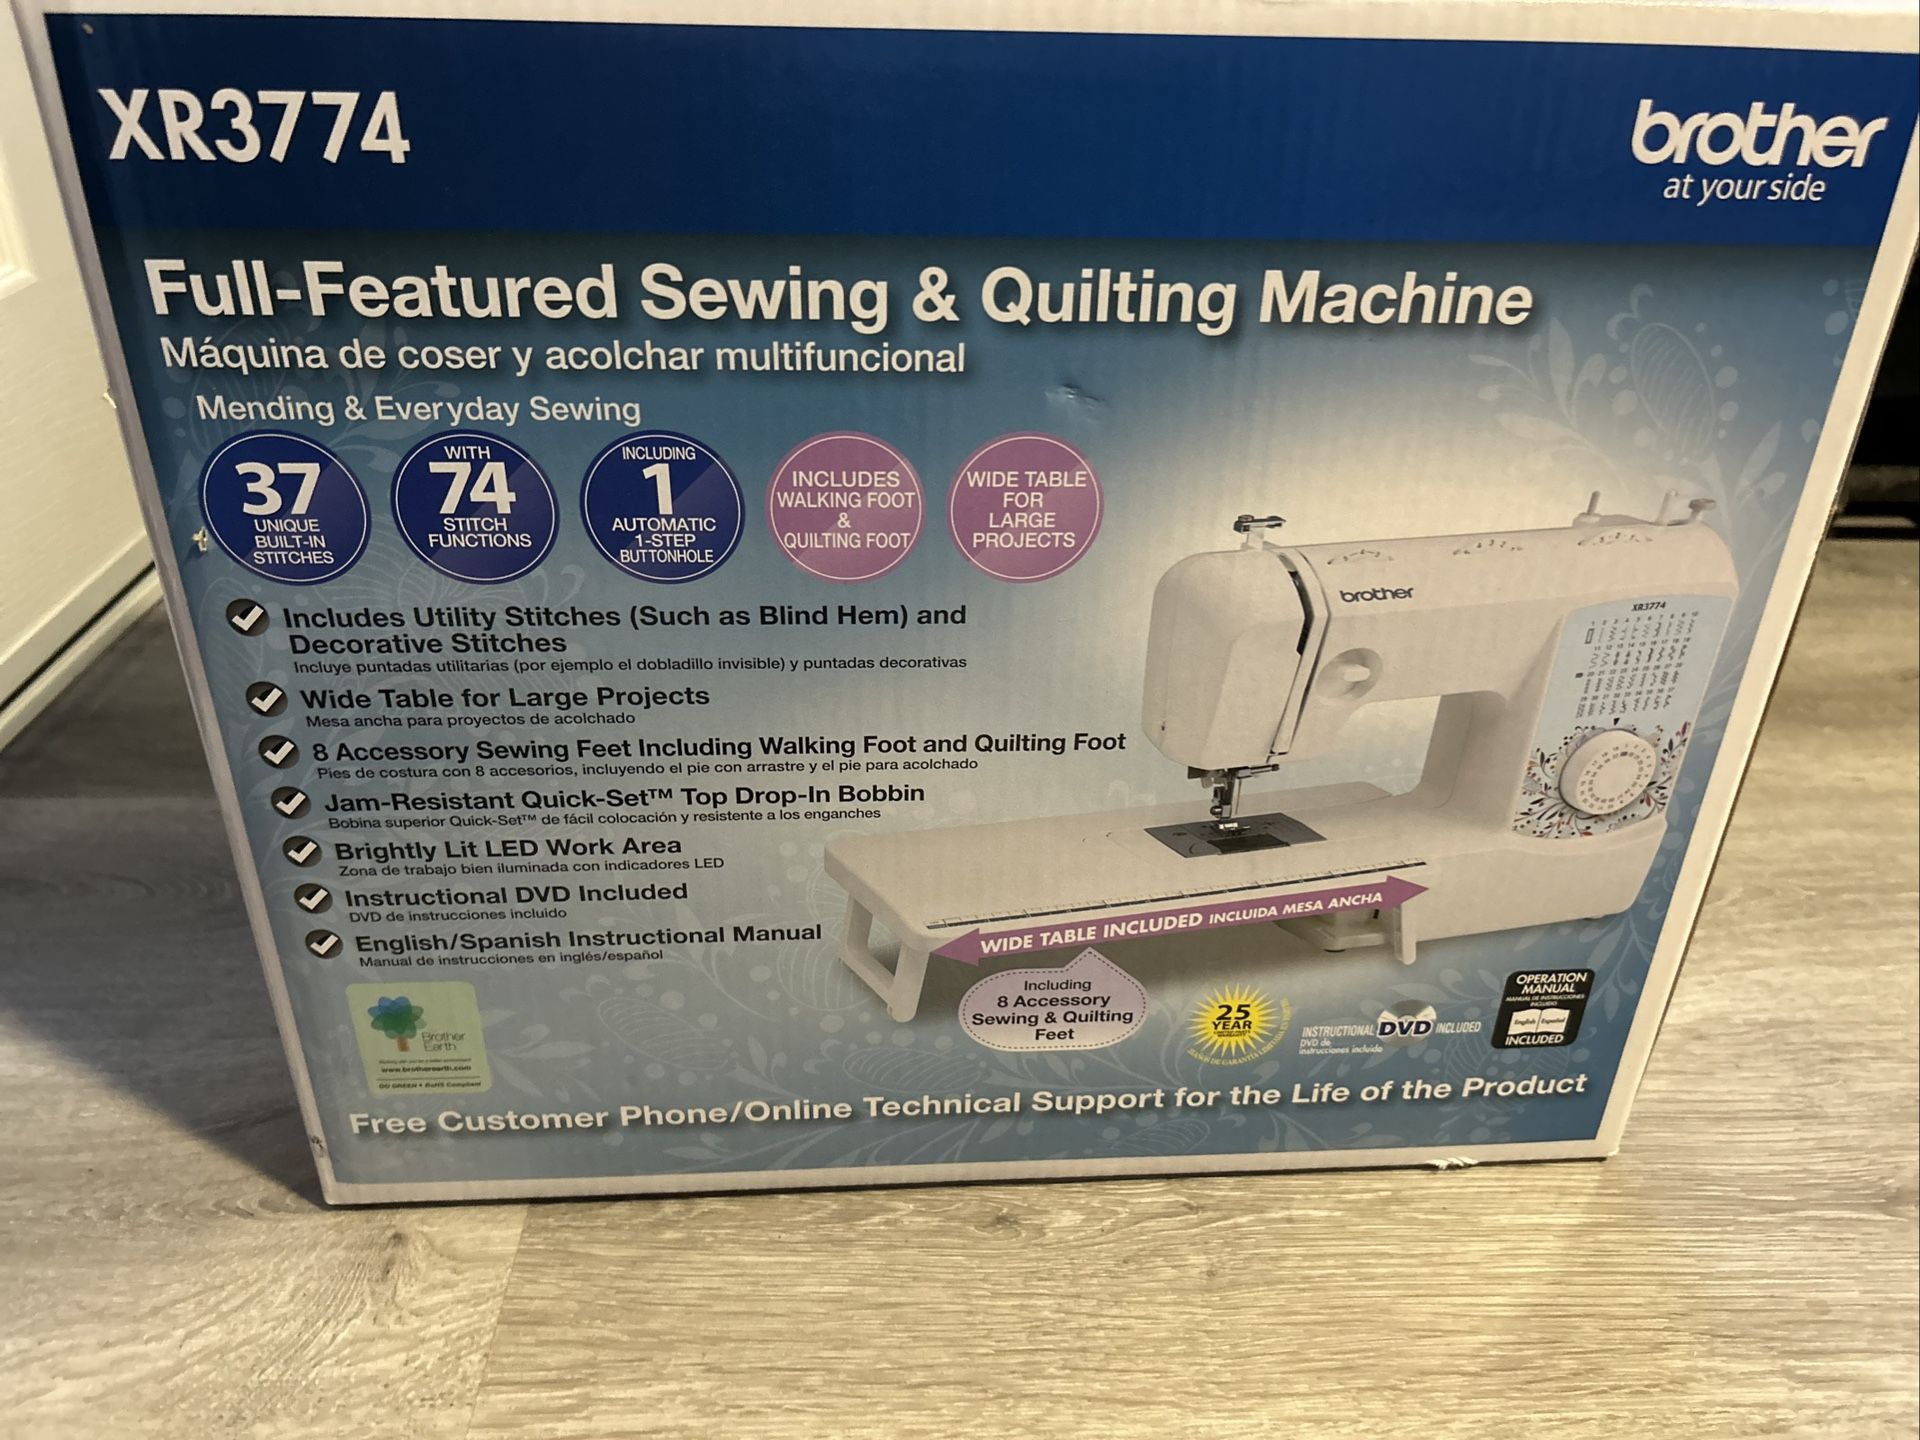 Brother XR3774 Sewing And Quilting Machine